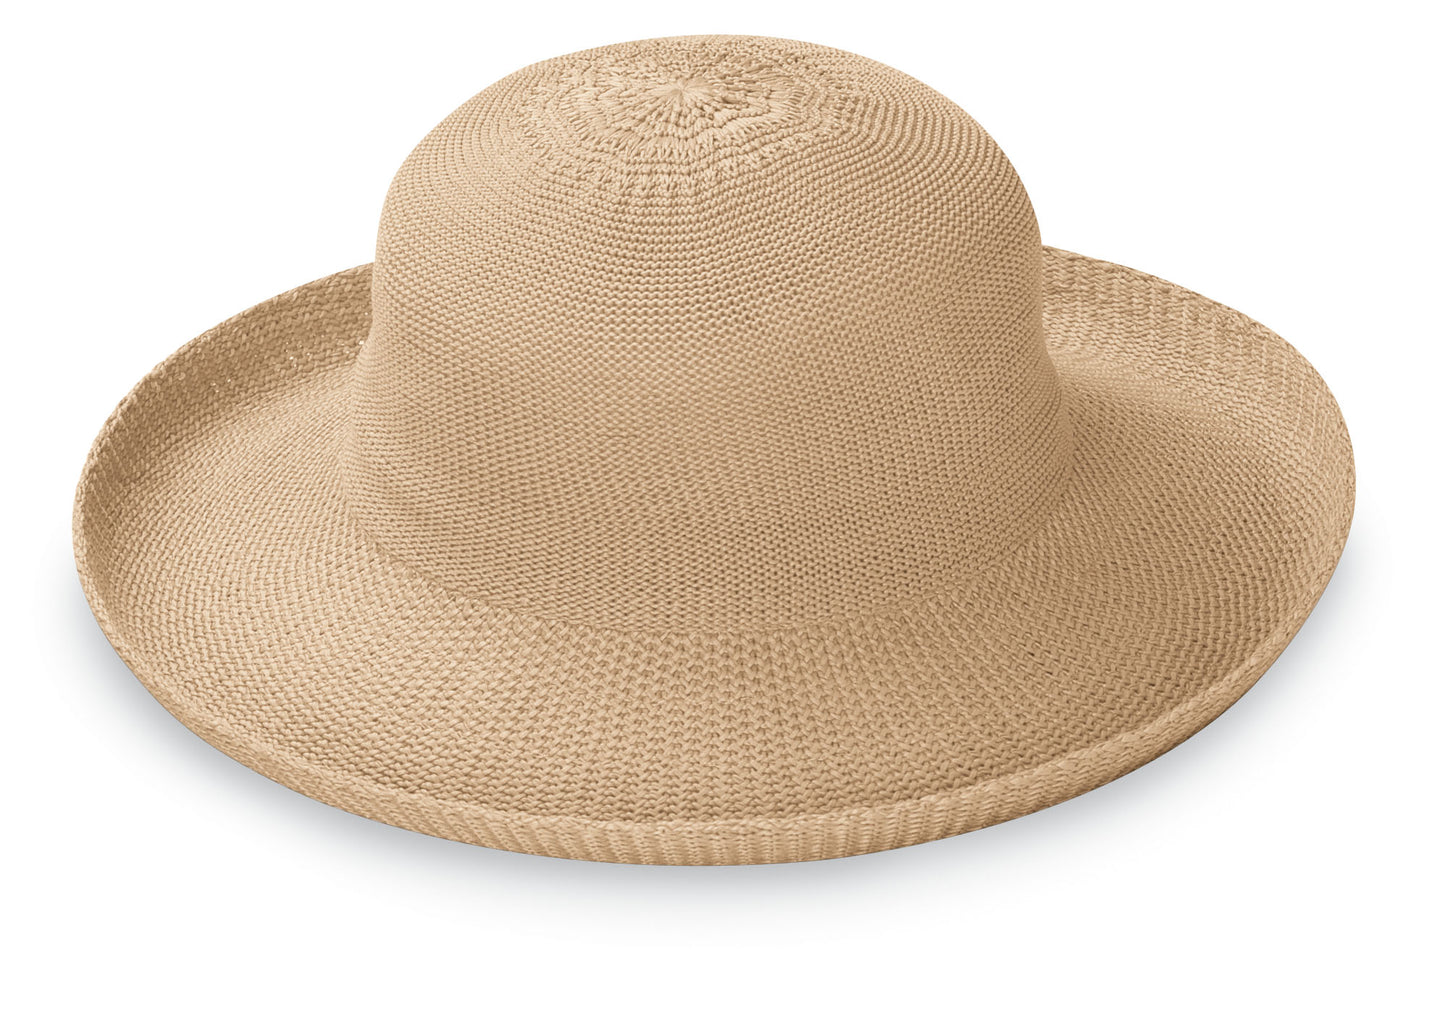 This packable beige beach hat not only offers UPF 50+ sun protection but is also recommended by the Skin Cancer Foundation. Its wide brim ensures stylish sun coverage, making it a travel-friendly and fashionable addition to your personal fashion collection.